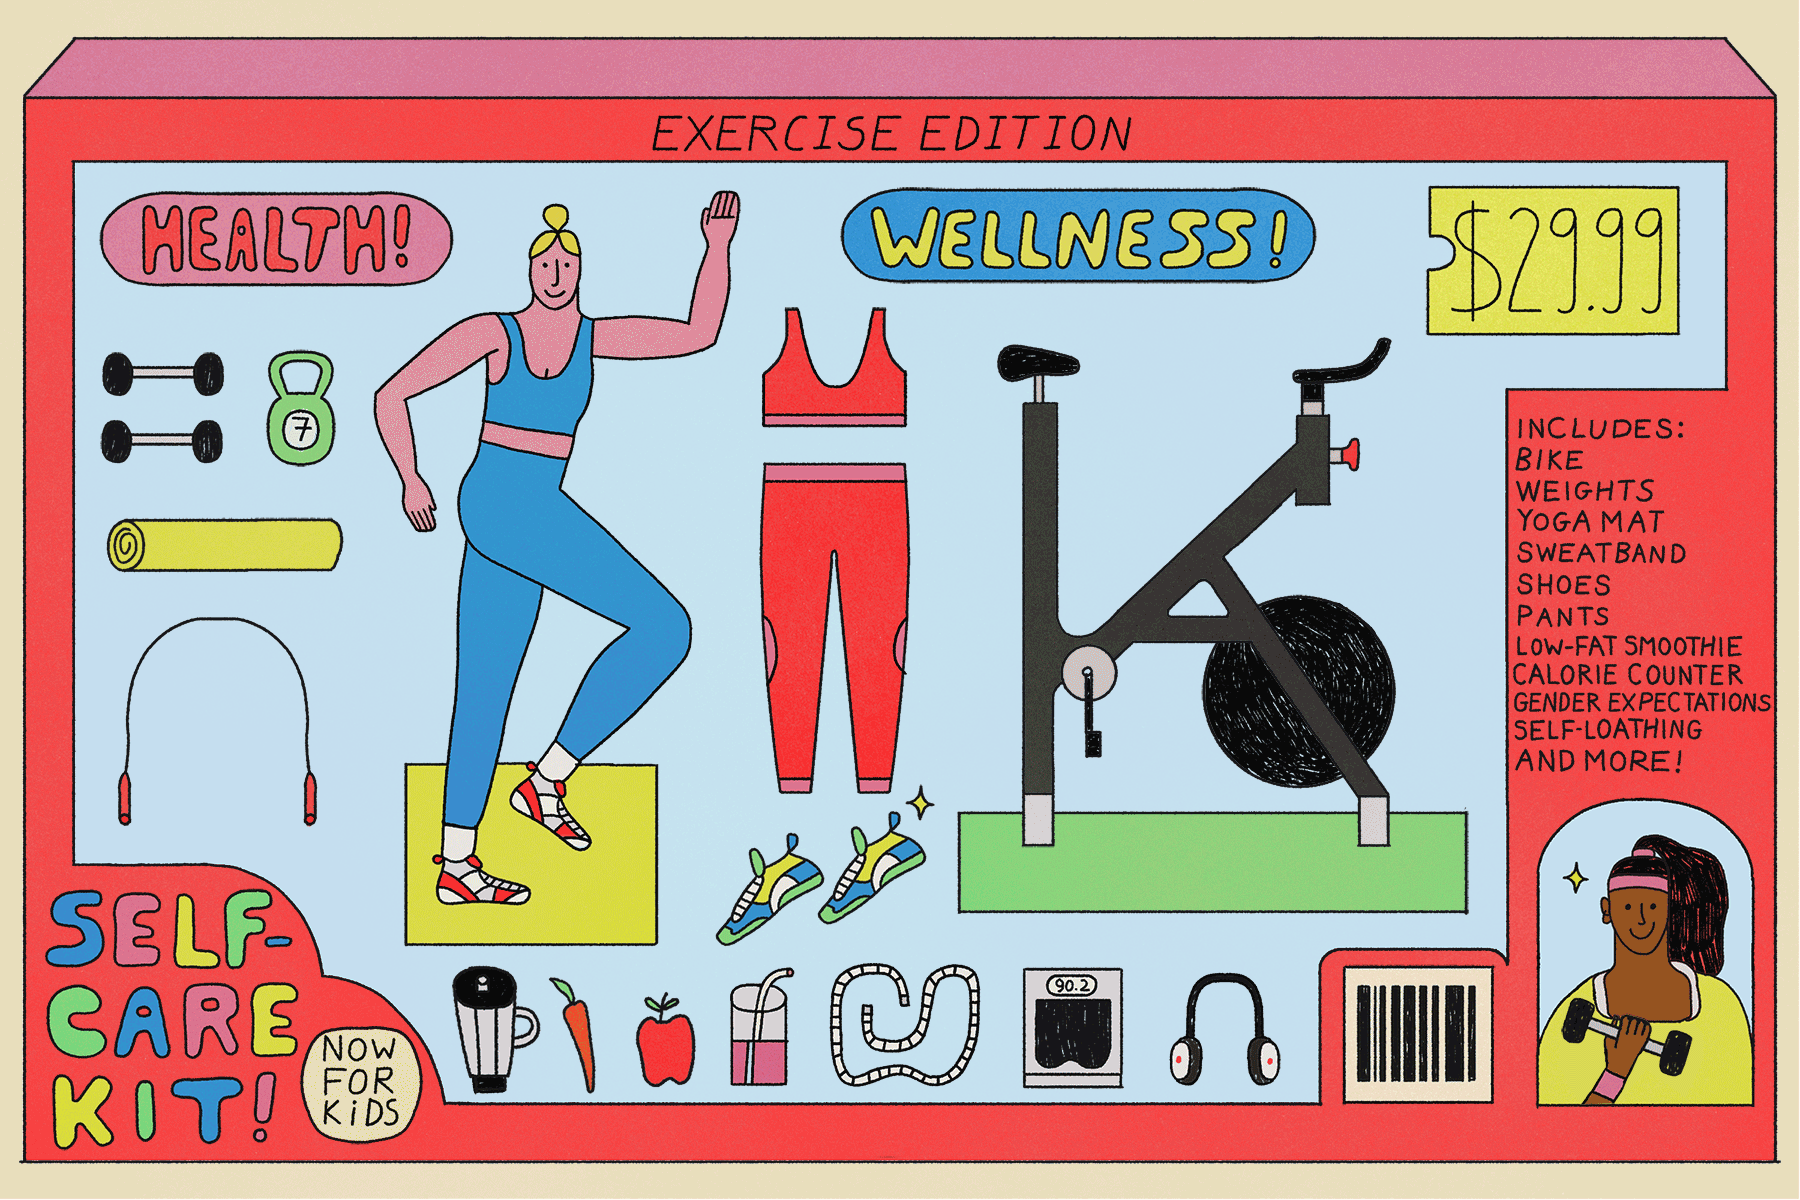 Wellness culture gone wrong has come for kids